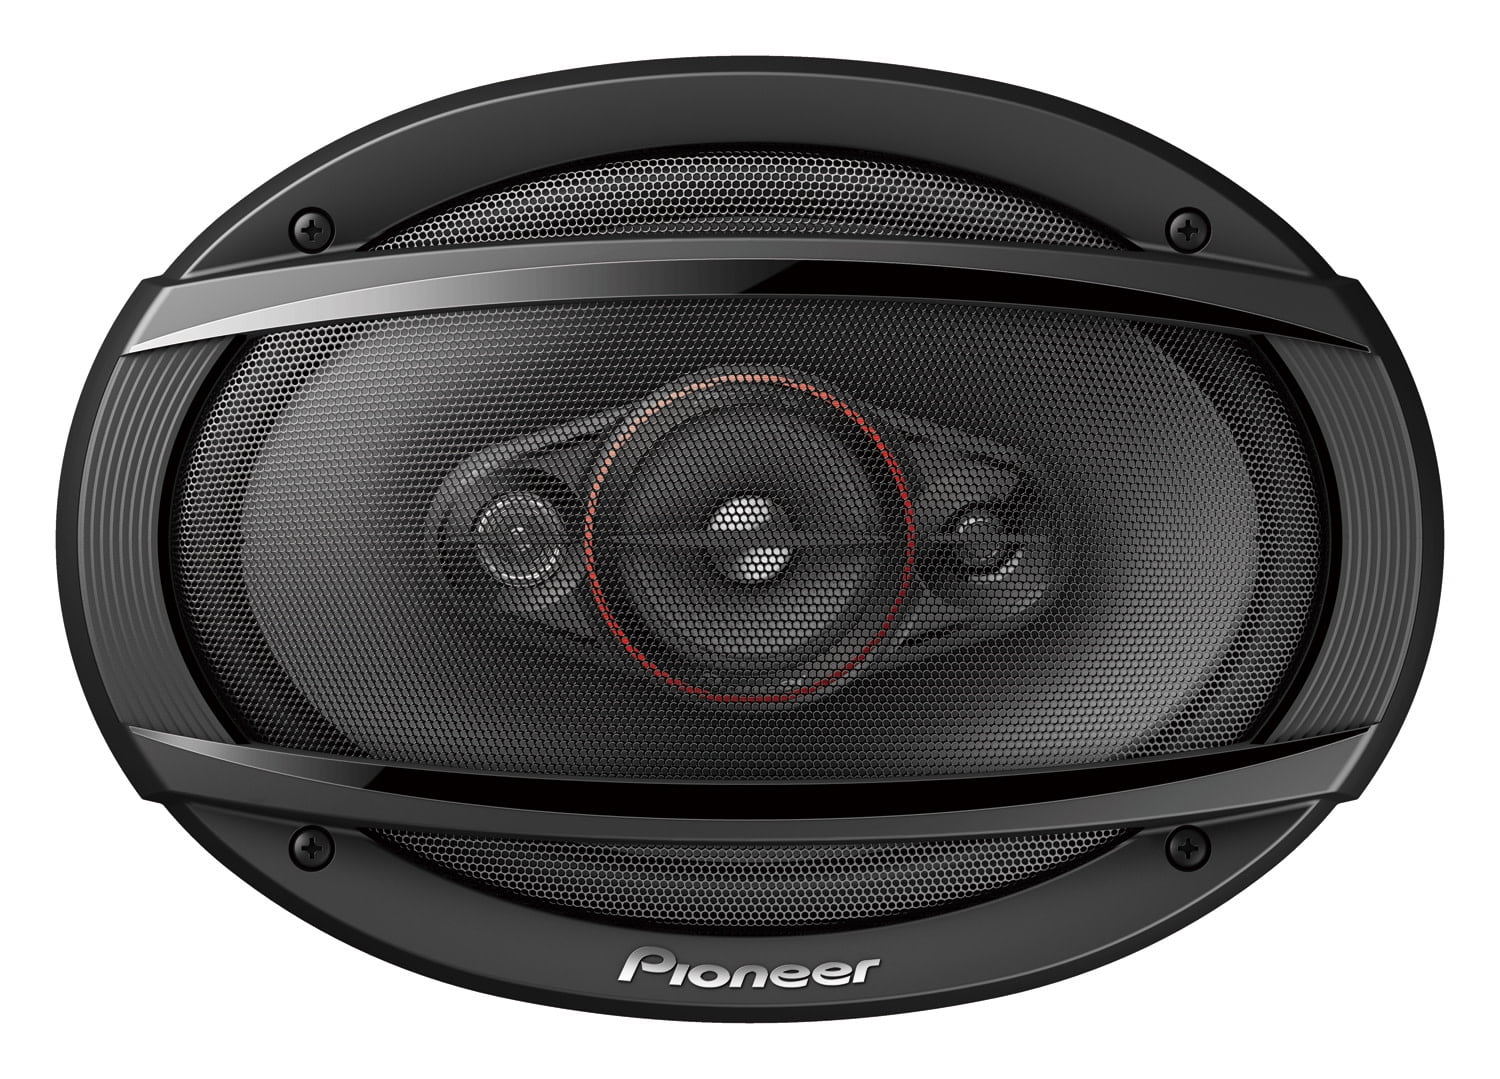 Pioneer TS-900M, (2) 6" x 9" 4-way coaxial speakers, 450W max power